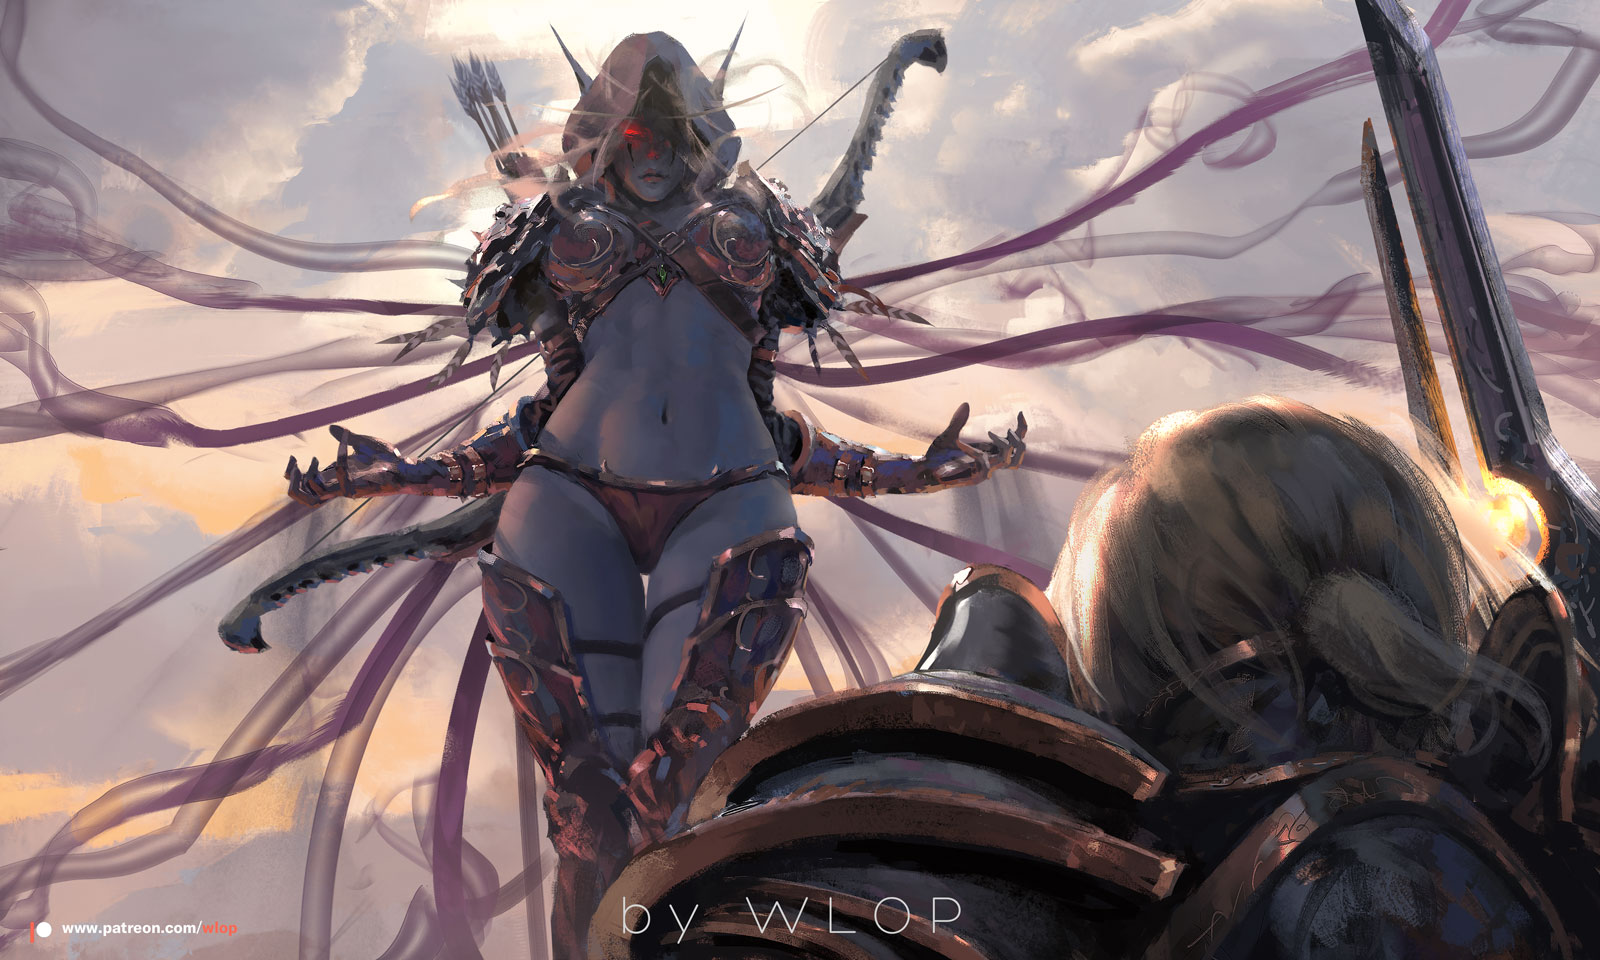 General 1600x960 Sylvanas Windrunner World of Warcraft Anduin Wrynn WLOP low-angle elves long eyebrows digital art watermarked